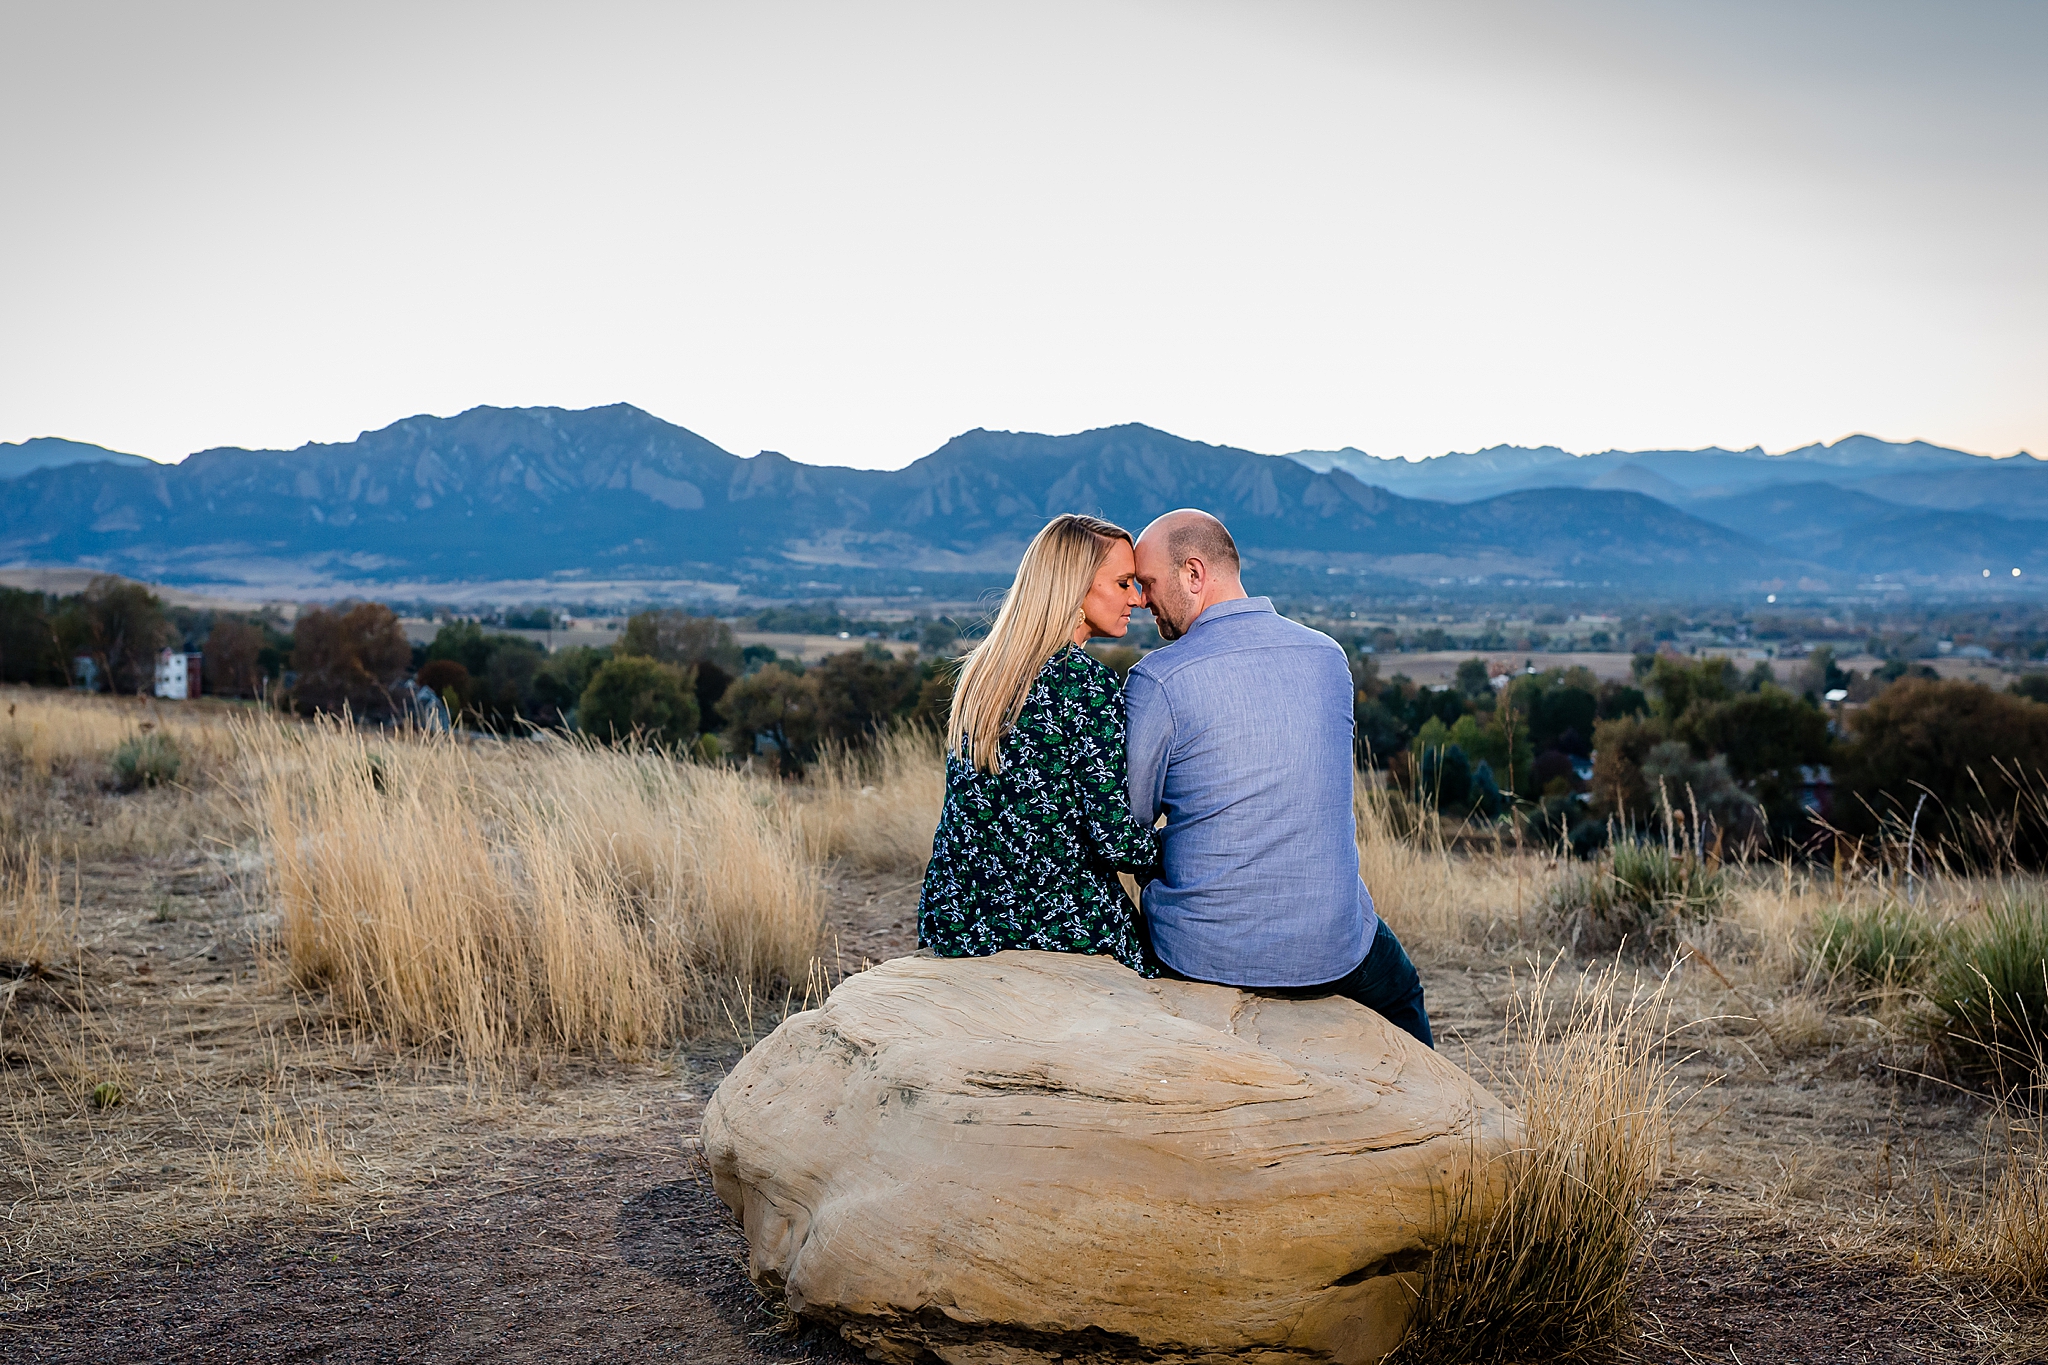 Engaged couple sitting together enjoying the mountain view during their Colorado engagement session. Kelli & Jason’s Sweet Cow Ice Cream and Davidson Mesa Fall Engagement Session by Colorado Engagement Photographer, Jennifer Garza. Colorado Engagement Photographer, Colorado Engagement Photography, Sweet Cow Engagement Session, Davidson Mesa Engagement Session, Colorado Fall Engagement Photos, Fall Engagement Photography, Mountain Engagement Photographer, Colorado Wedding, Colorado Bride, MagMod